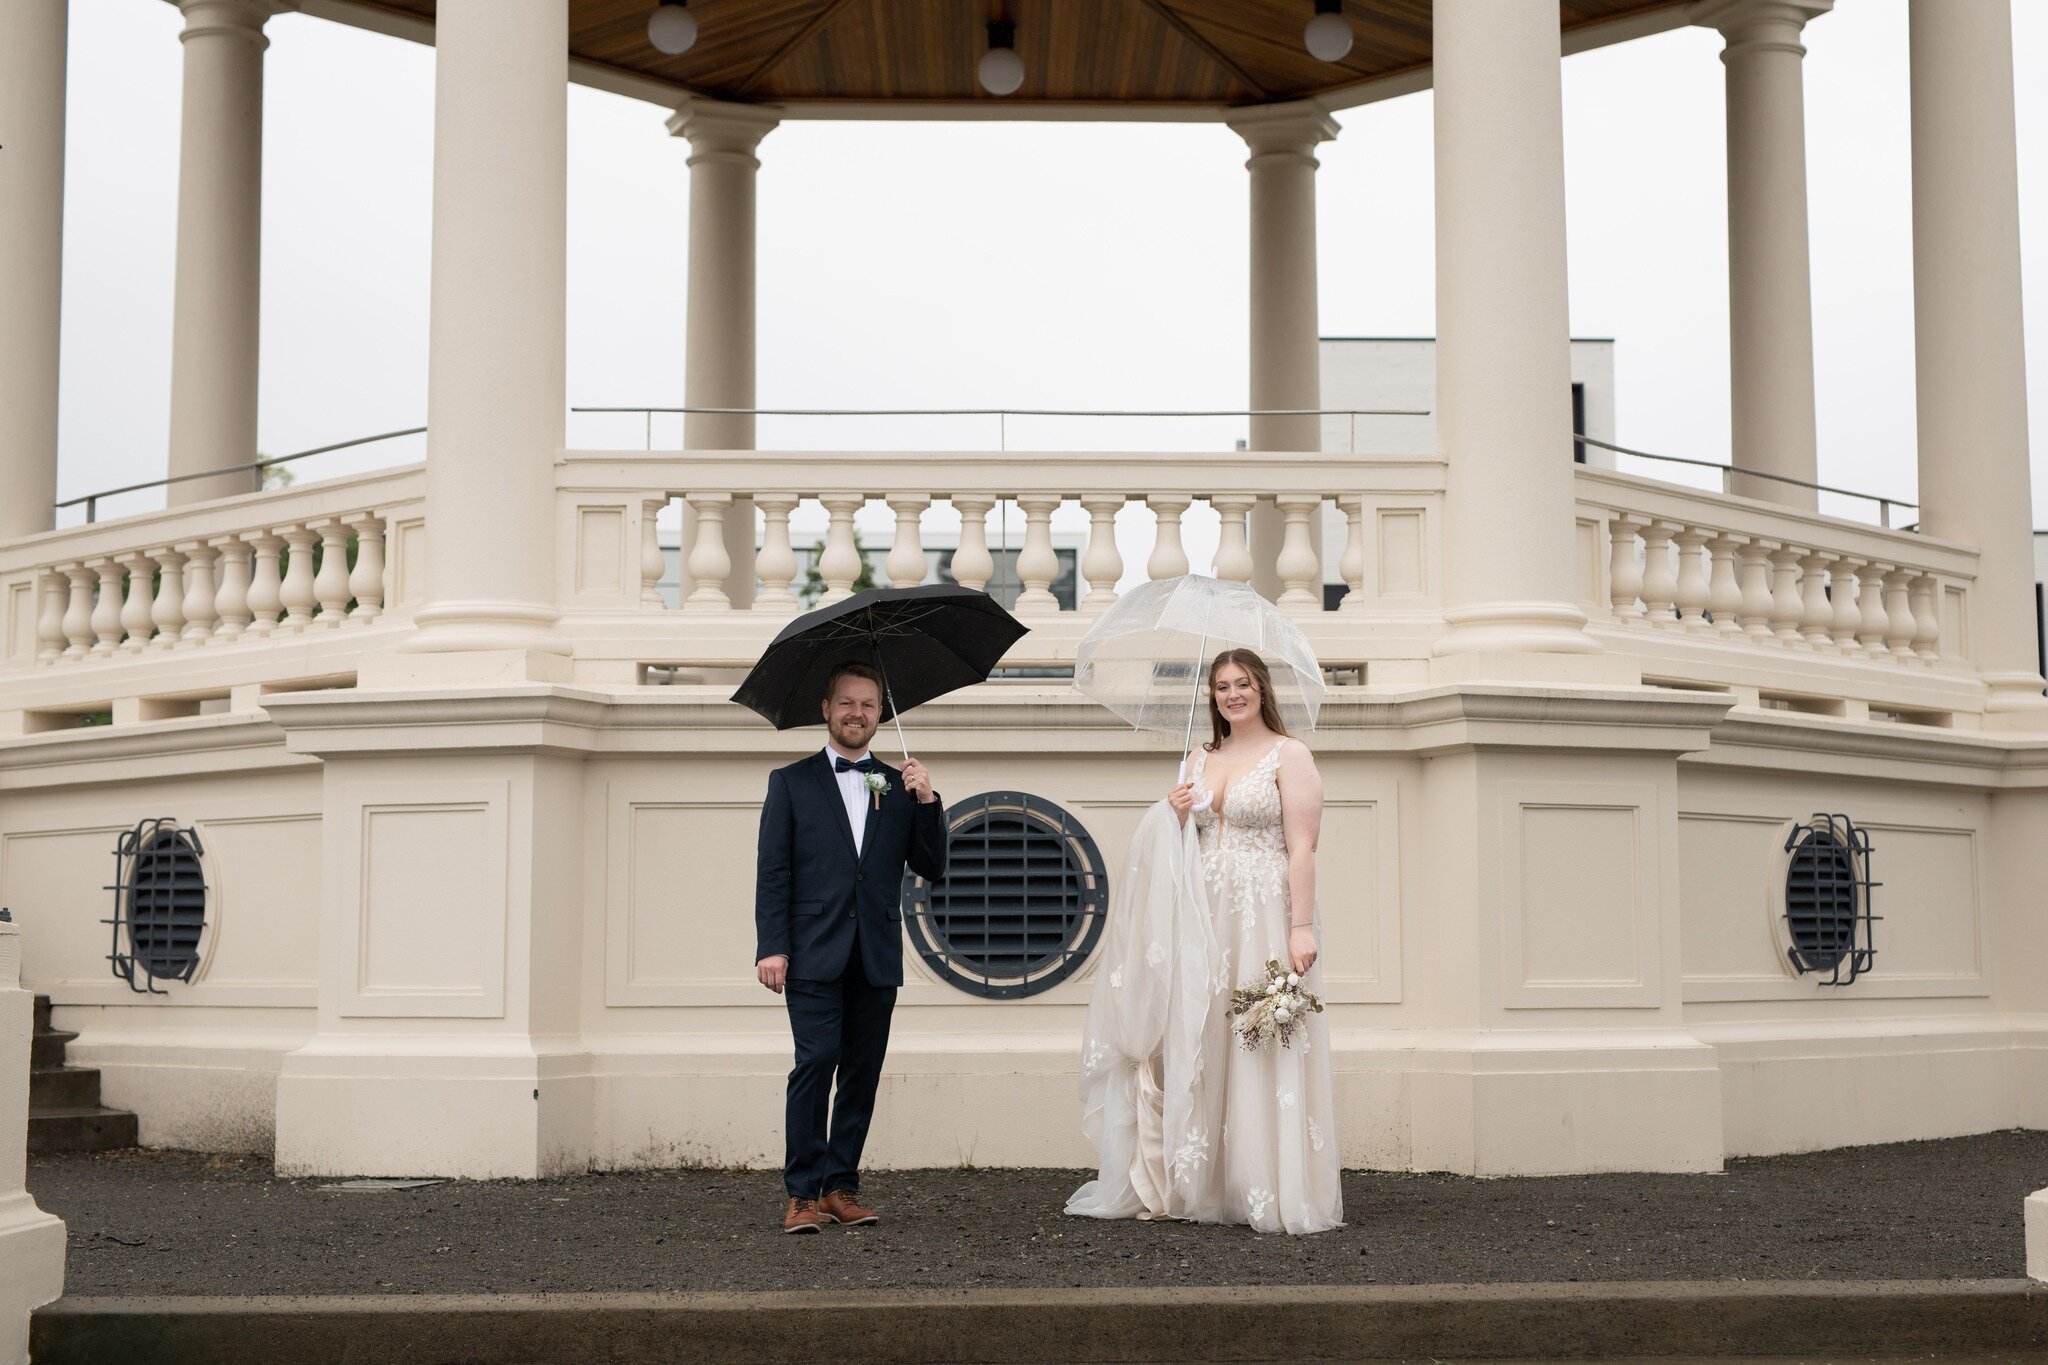 T &amp; C on their wedding day over the weekend! ⭐⭐Congrats guys!! ⭐⭐ A bit wet but a wonderful day with lots of love and laughs!